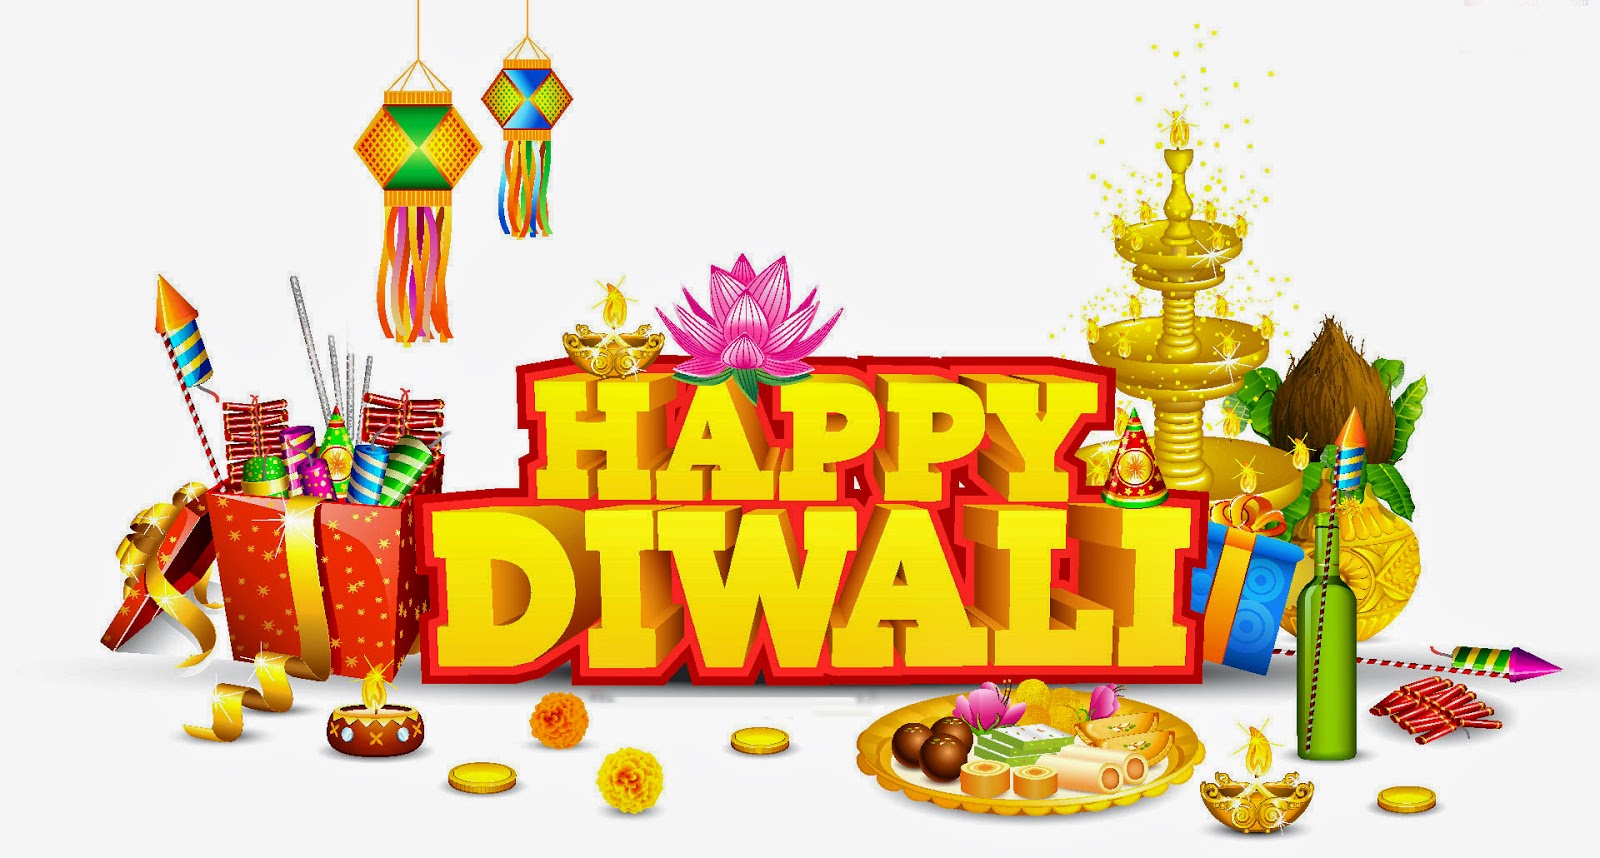 Happy Diwali - , messages, wishes, quotes, fireworks and rangoli